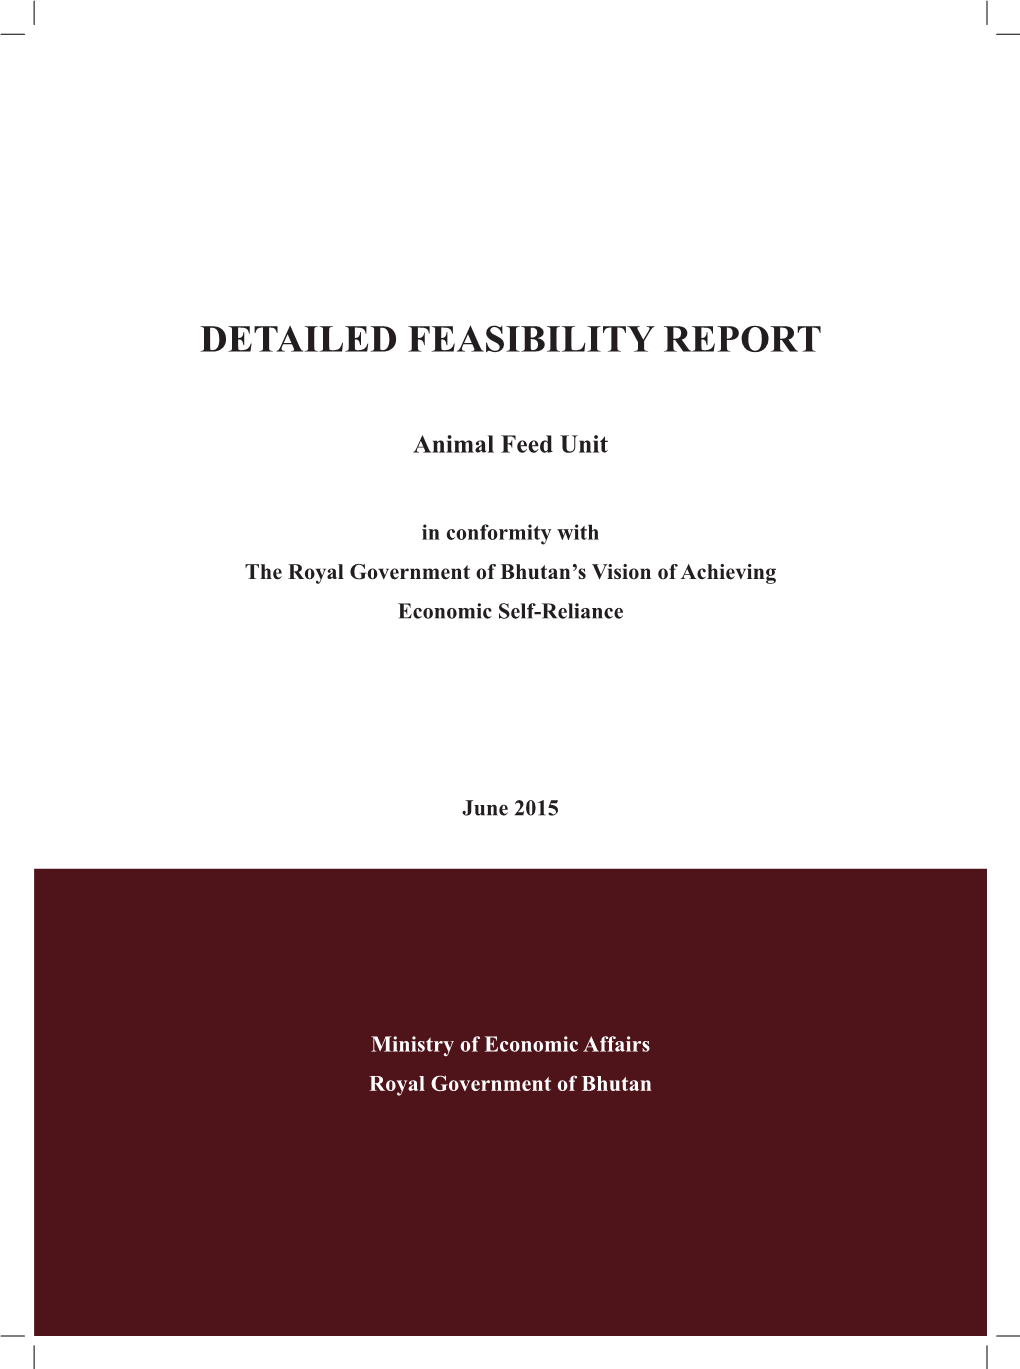 Detailed Feasibility Report